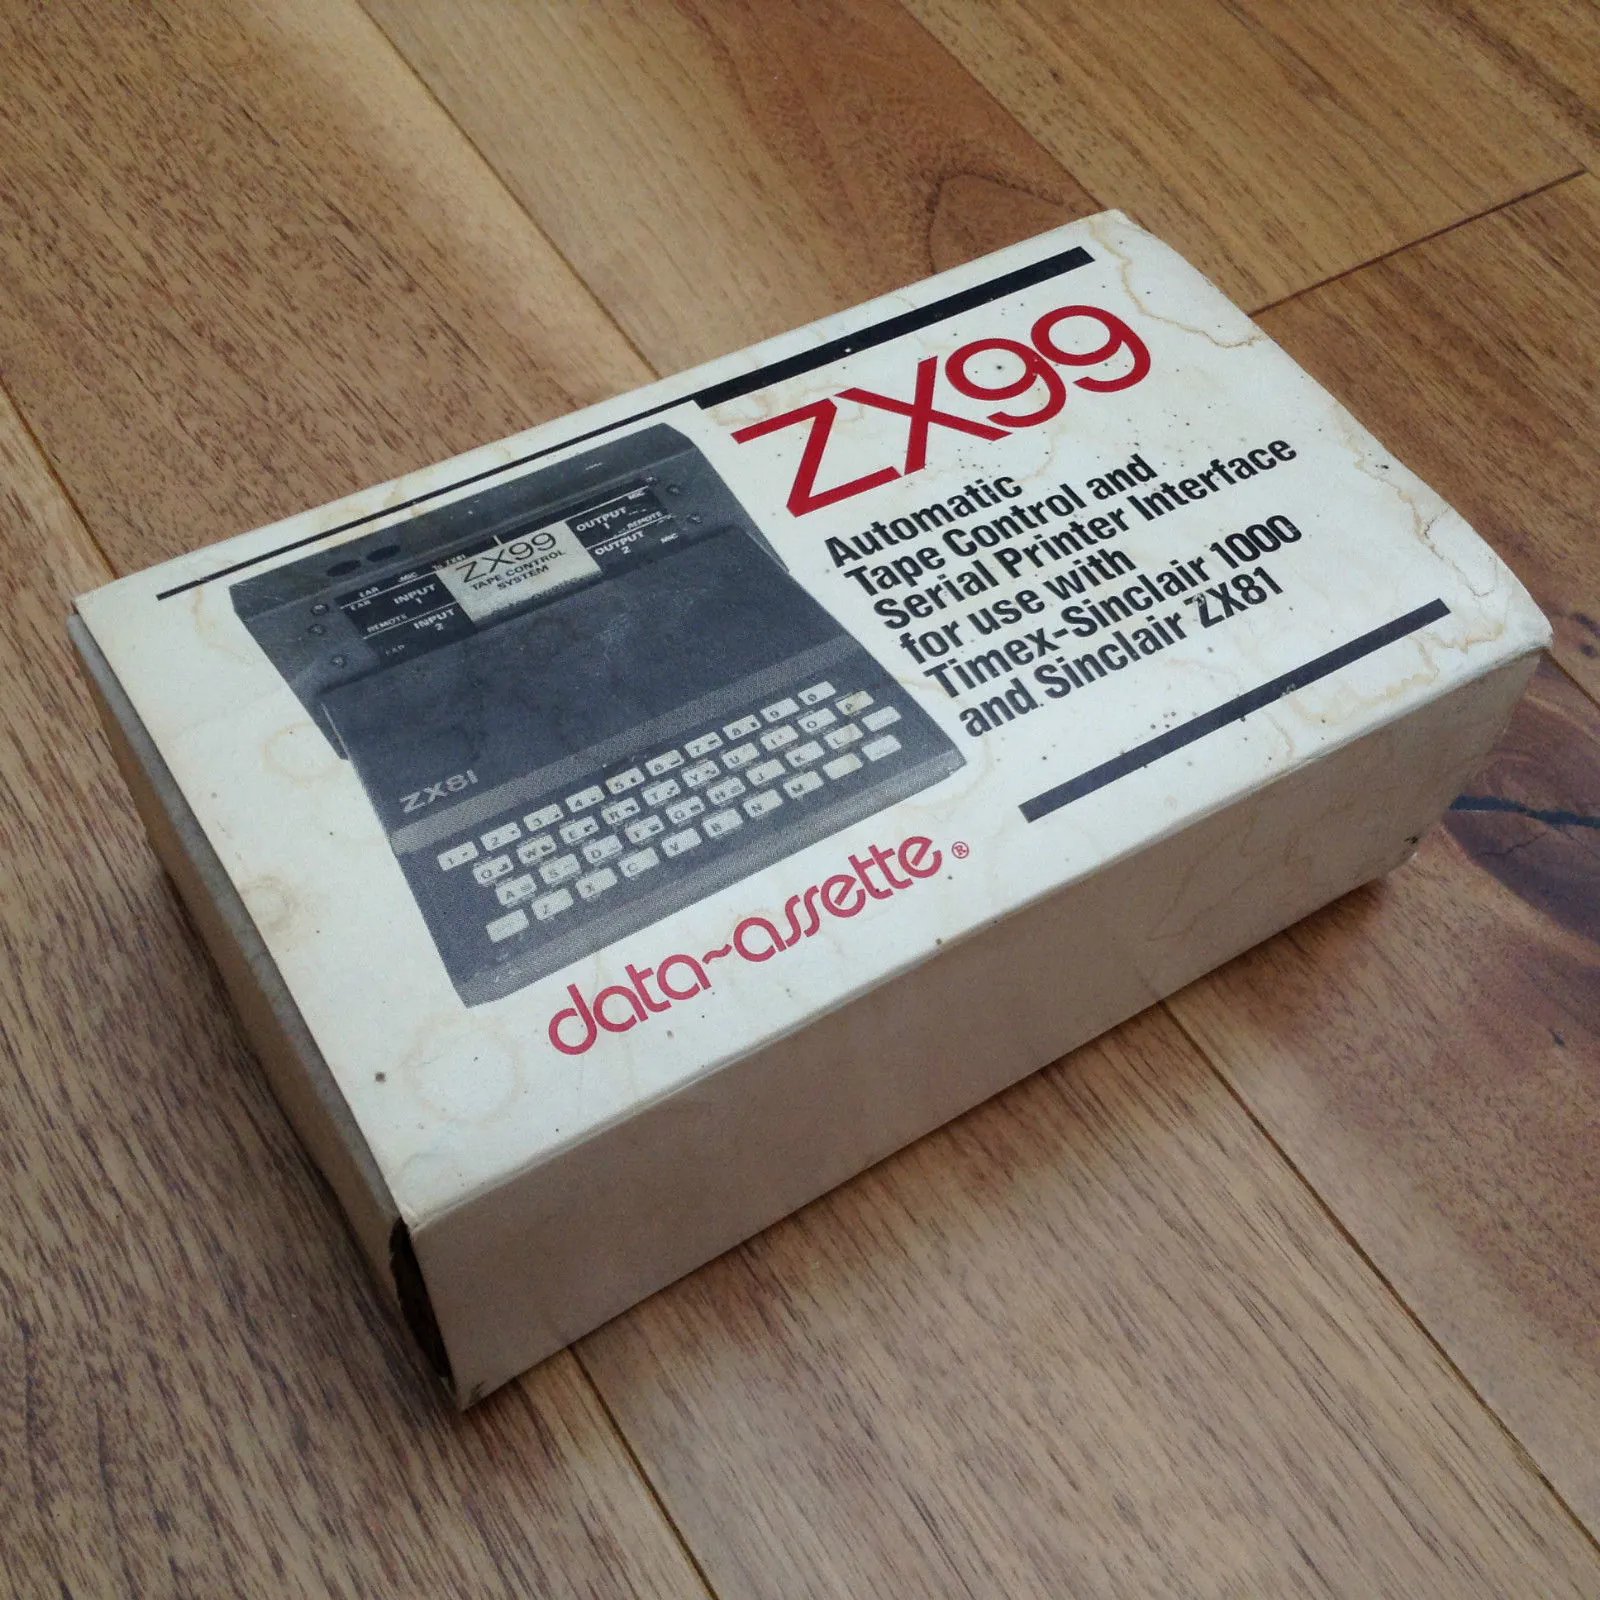 ZX-99 Tape Control – Timex/Sinclair Computers